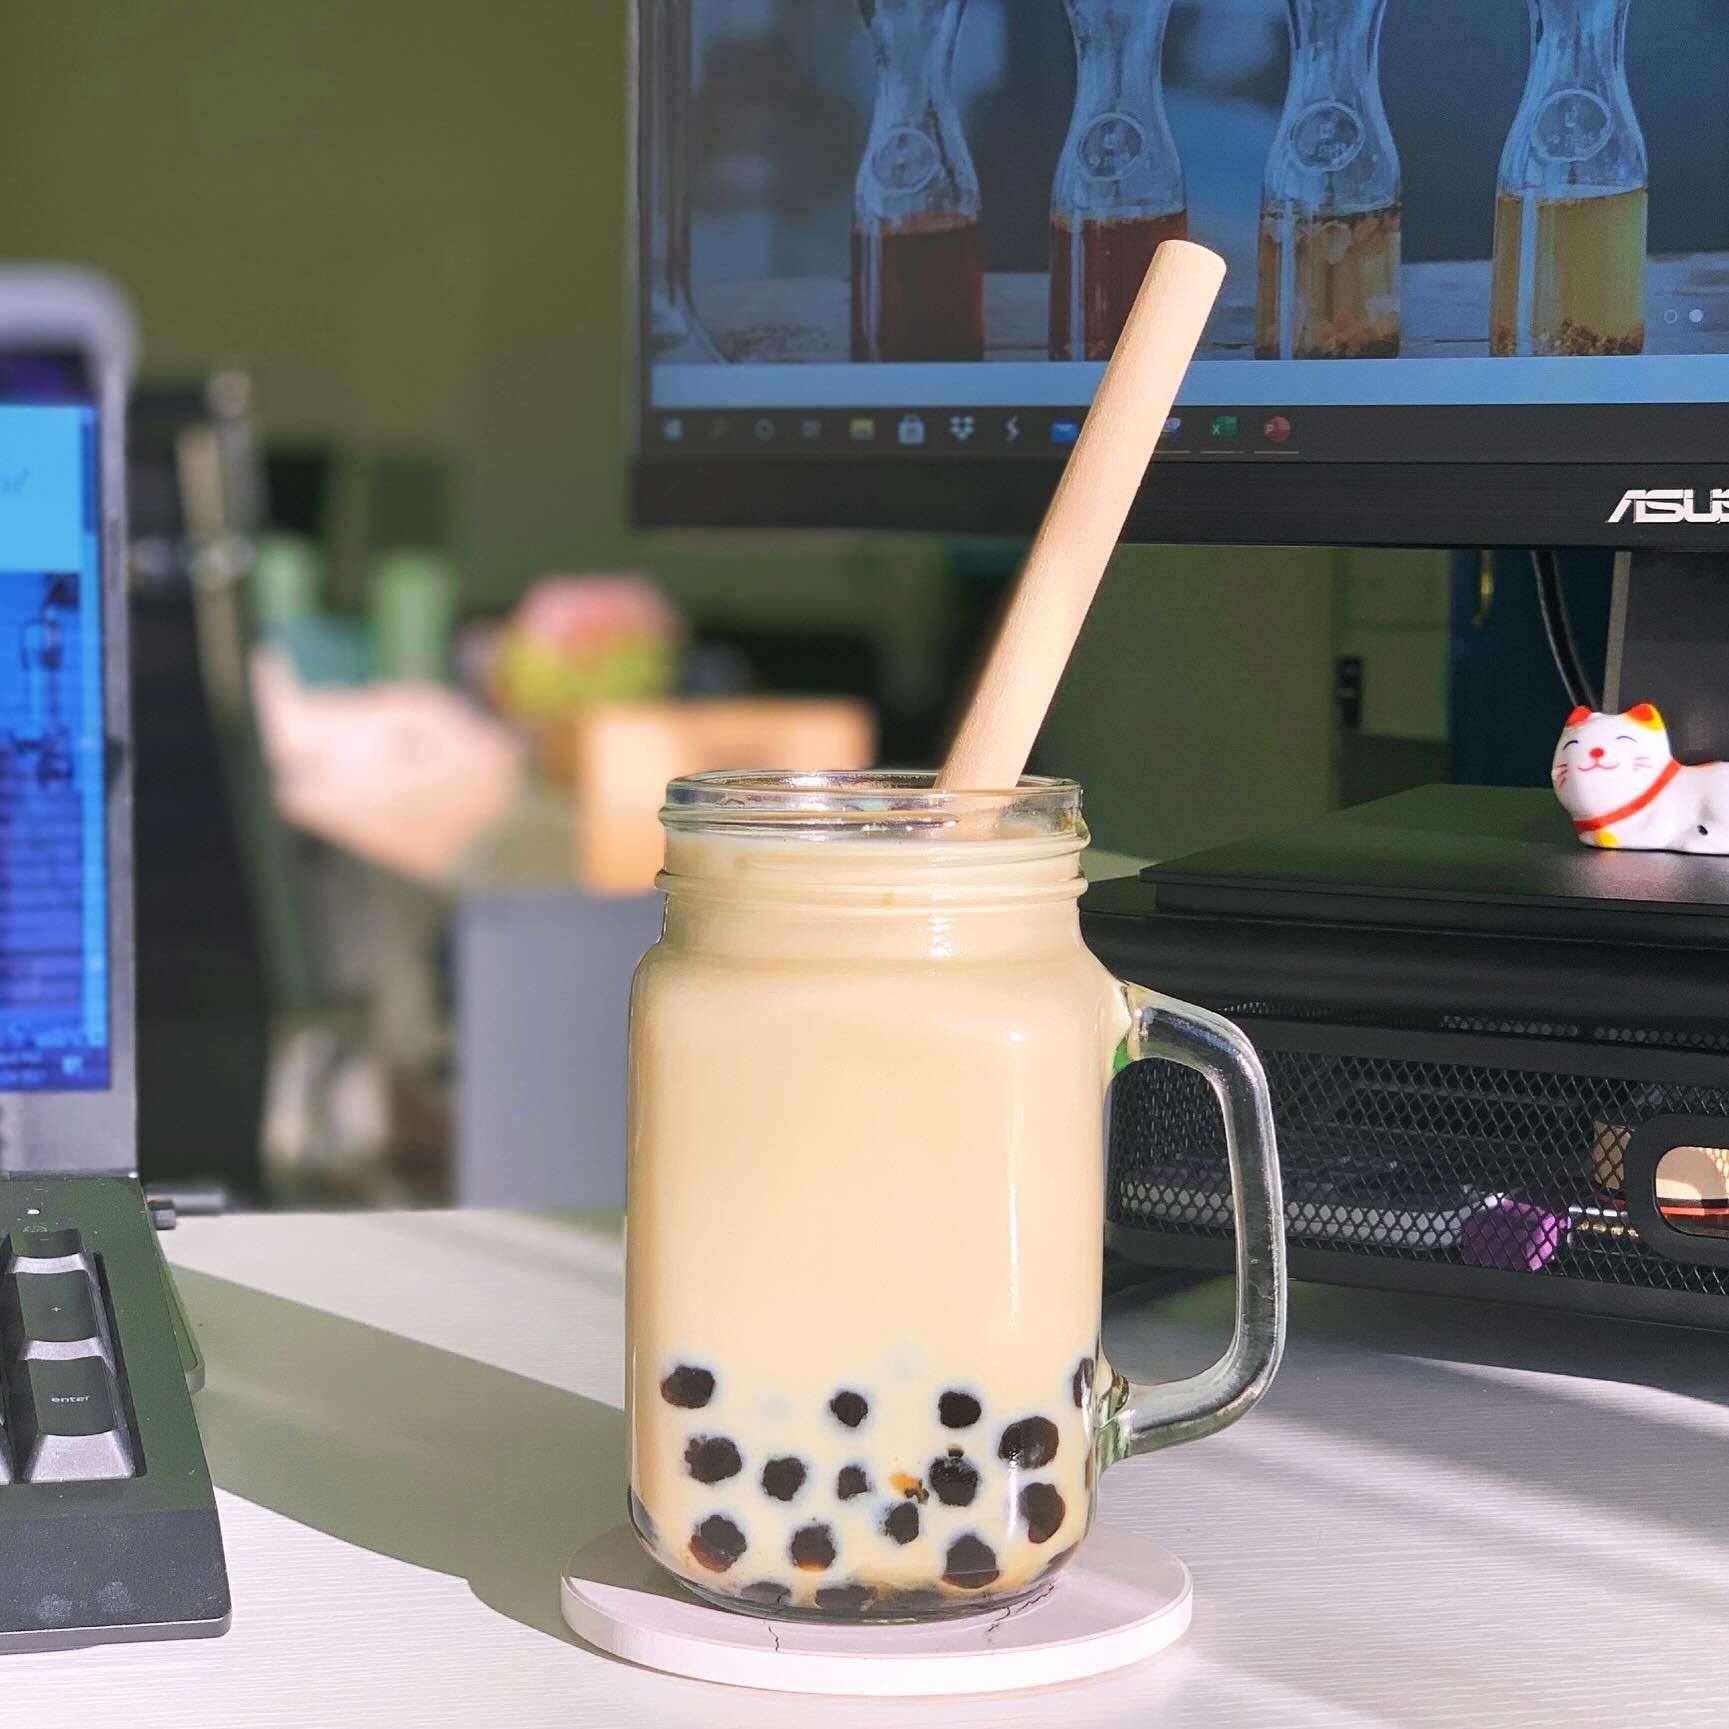 Happy National Boba Day!! We&rsquo;re celebrating in the office today with an extra big scoop of tapioca🧋#nationalbobaday #boba #bobatea